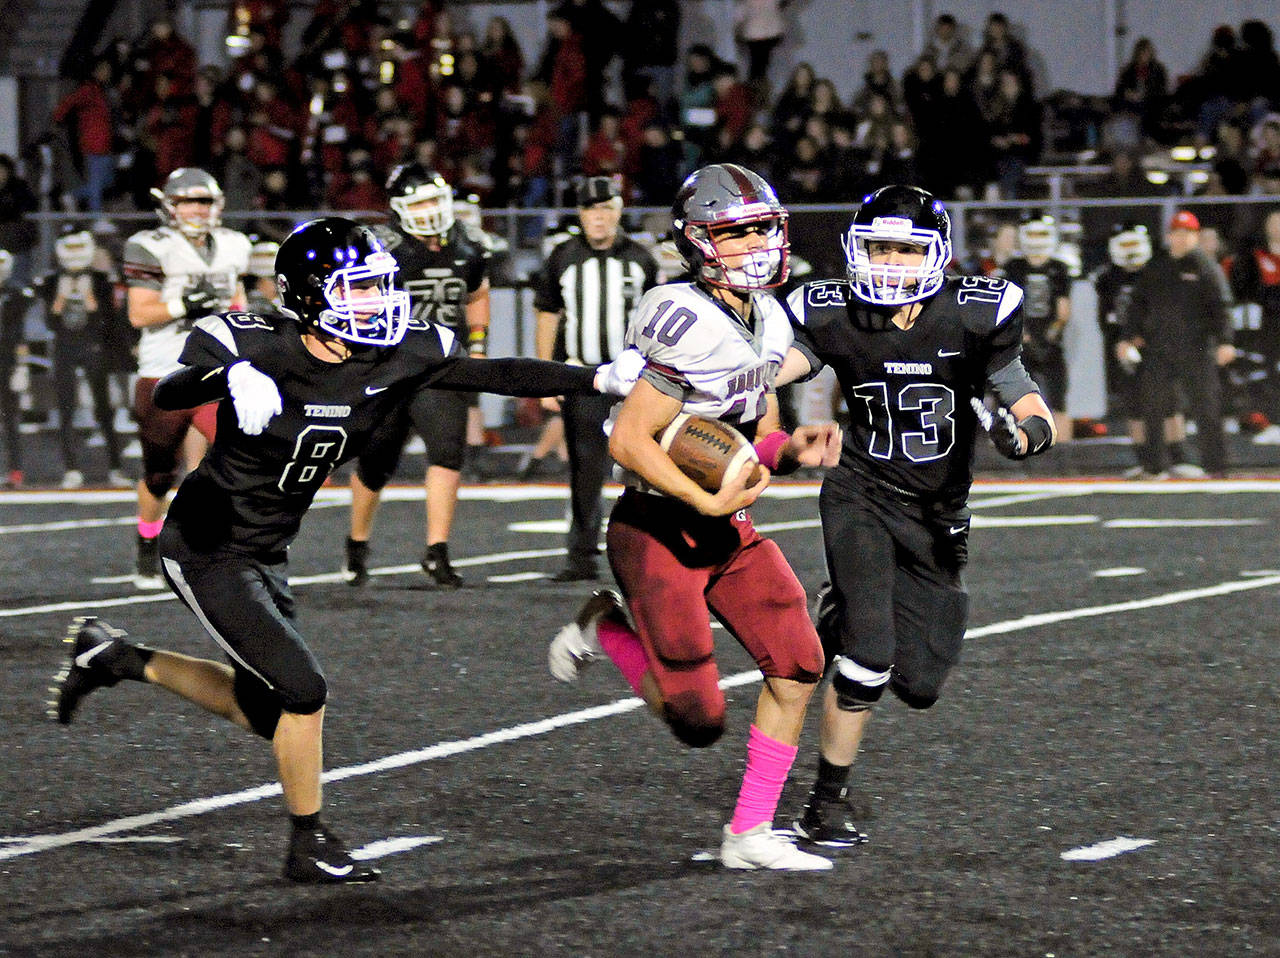 Hoquiam’s Malaki Eaton goes for a 20-yard run against Tenino on Friday in Tenino. Eaton ran for 160 yards on 13 carries with a touchdown in Hoquiam’s 62-0 win over the Beavers. (Hasani Grayson | Grays Harbor News Group)